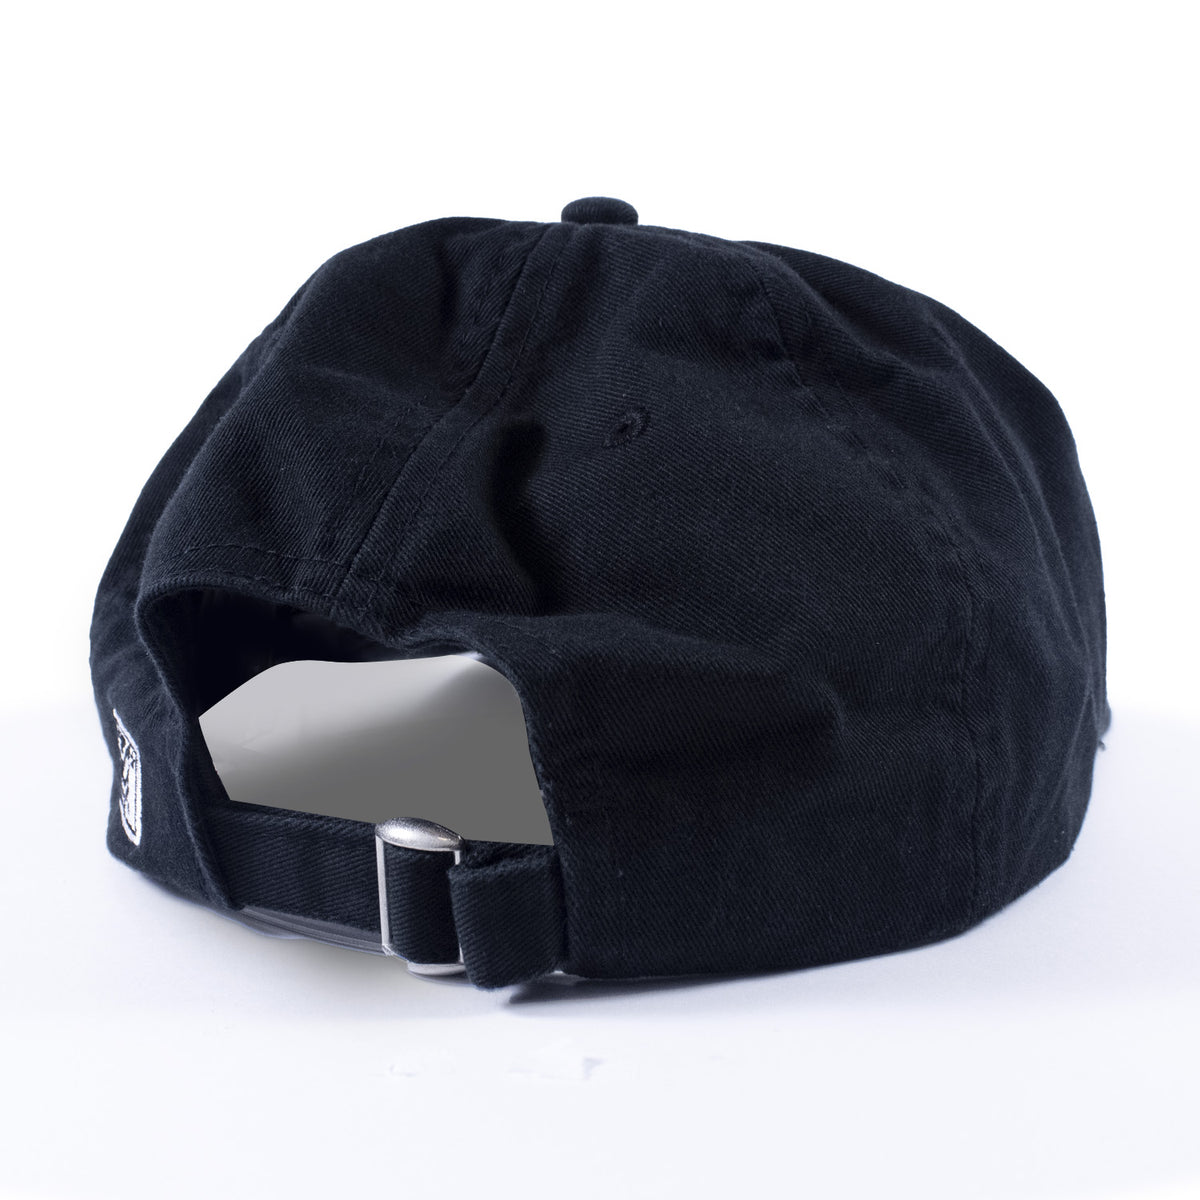 Police Security Baseball Hat